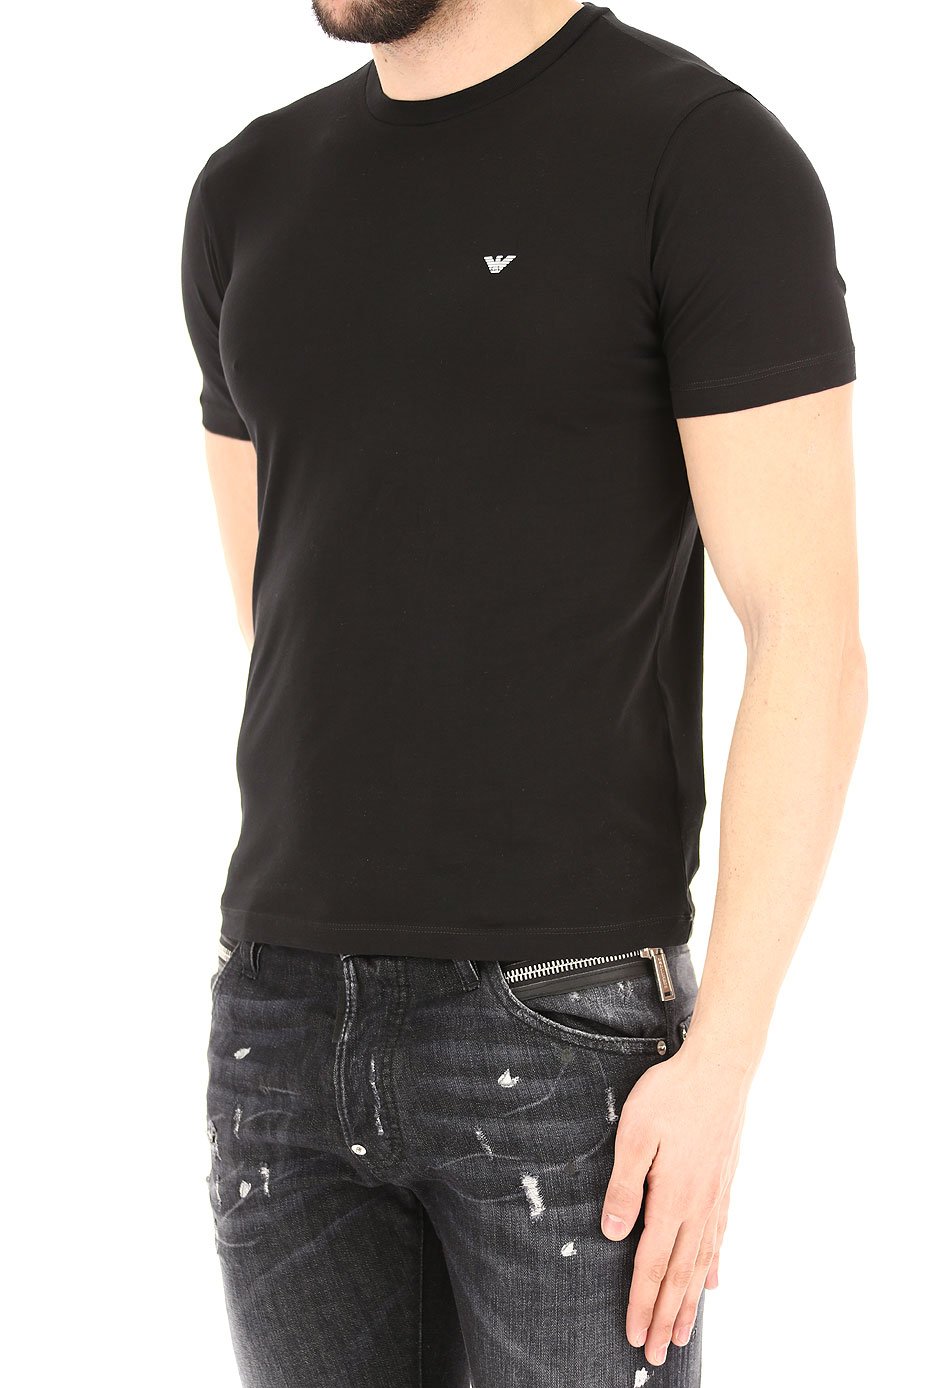 Mens Clothing Emporio Armani, Style code: 8n1d61-1jpzz-0999